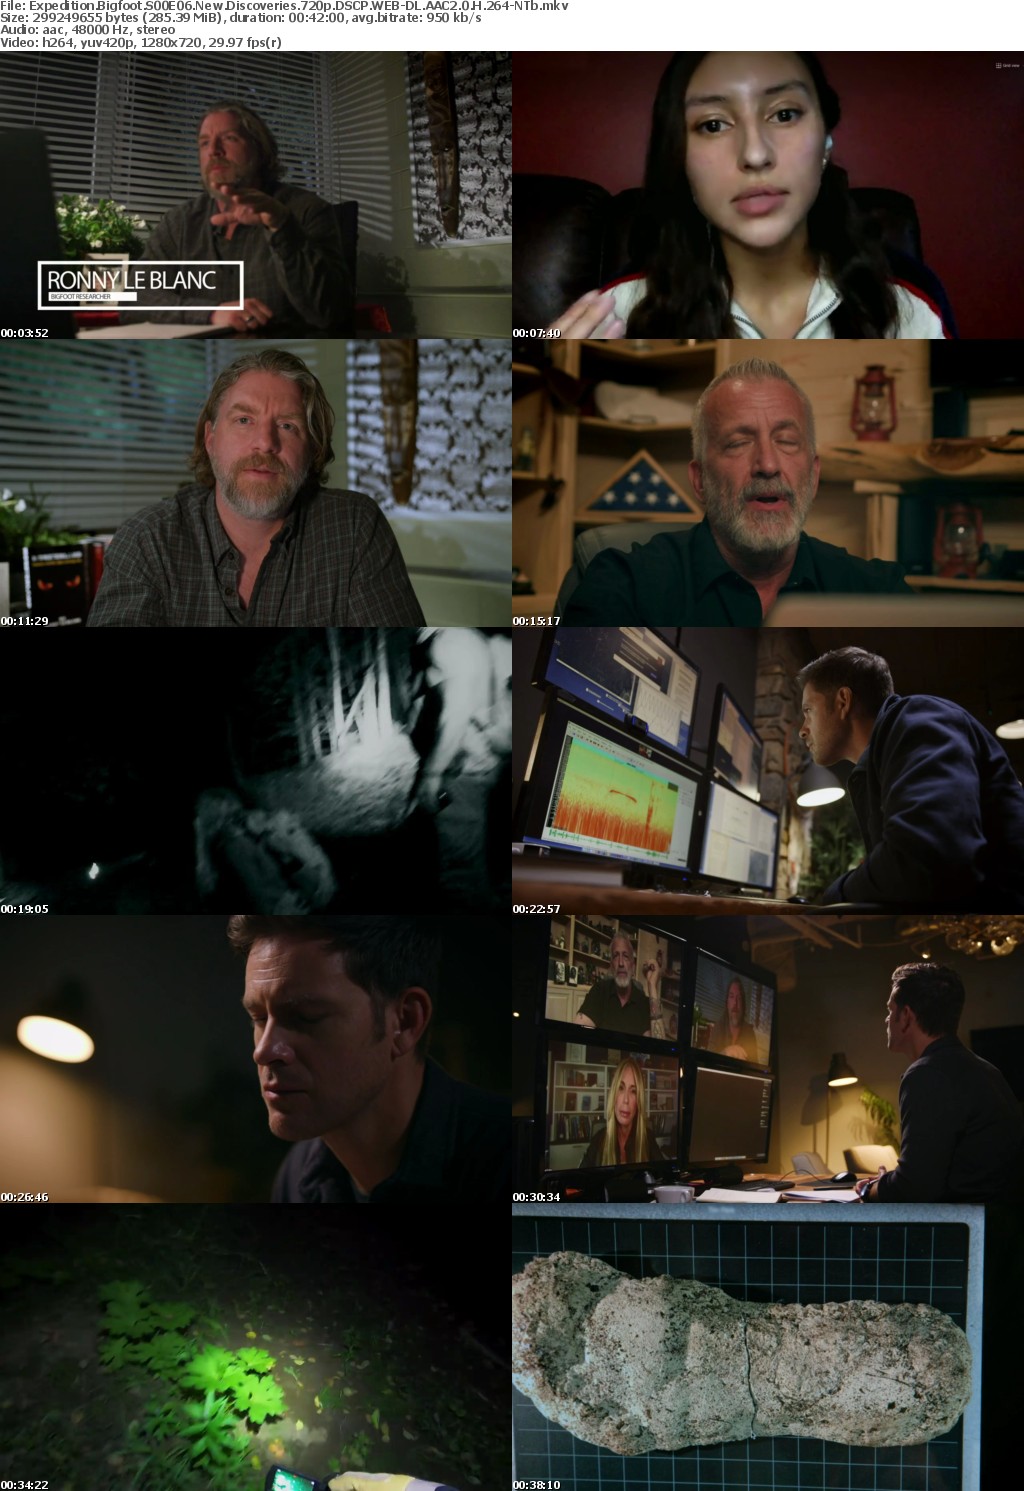 Expedition Bigfoot S00E06 New Discoveries 720p DSCP WEB-DL AAC2 0 H 264-NTb